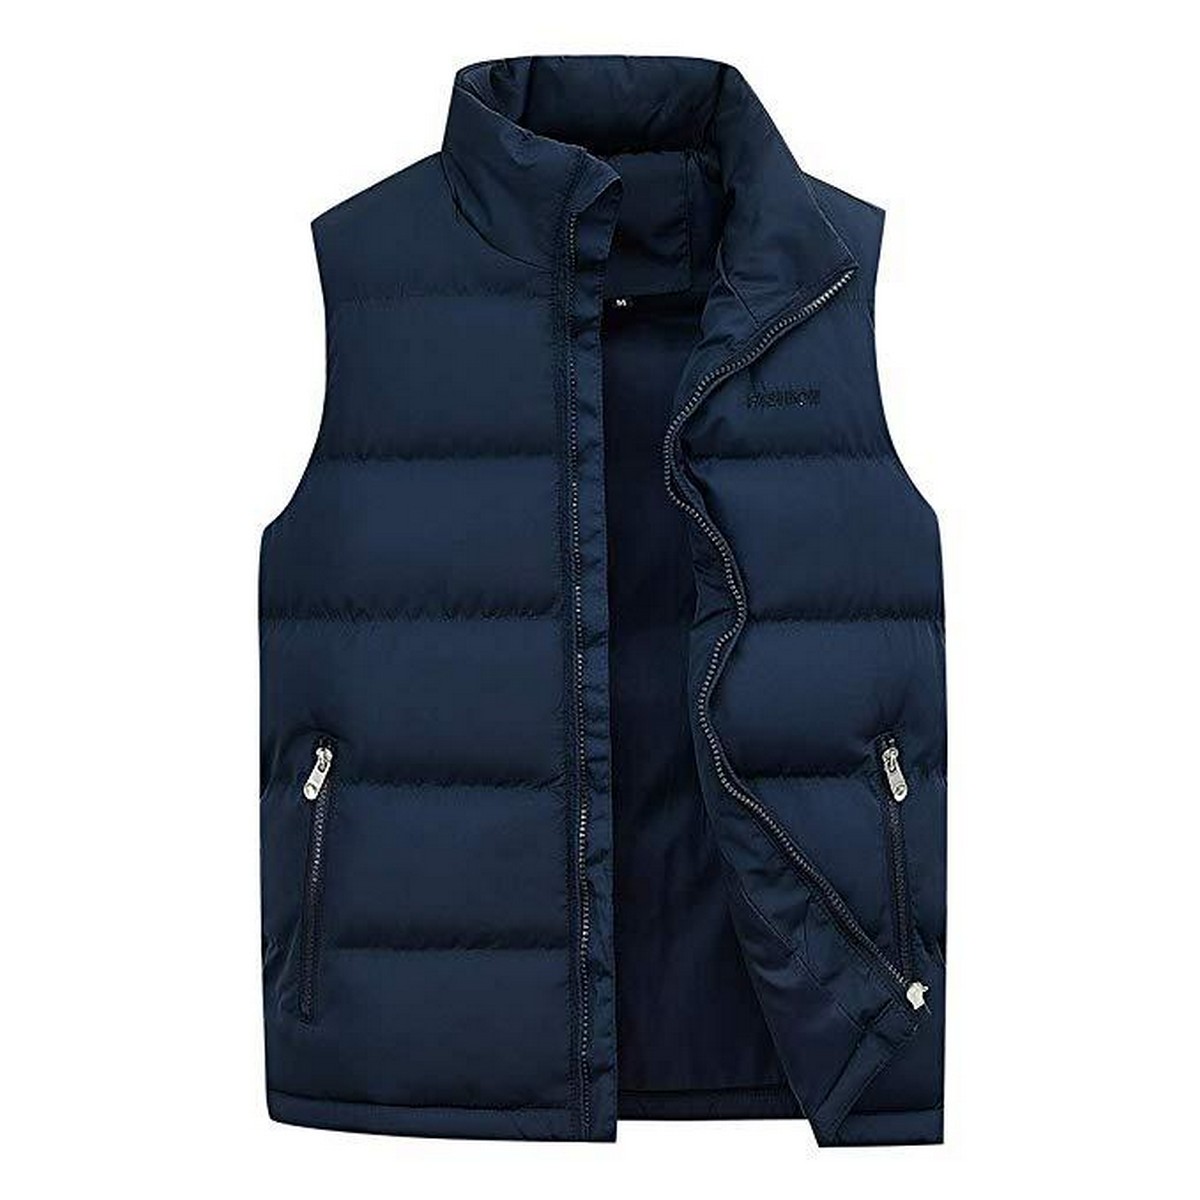 Best Quality Sleeveless low weight Jackets front 2 pockets for Men